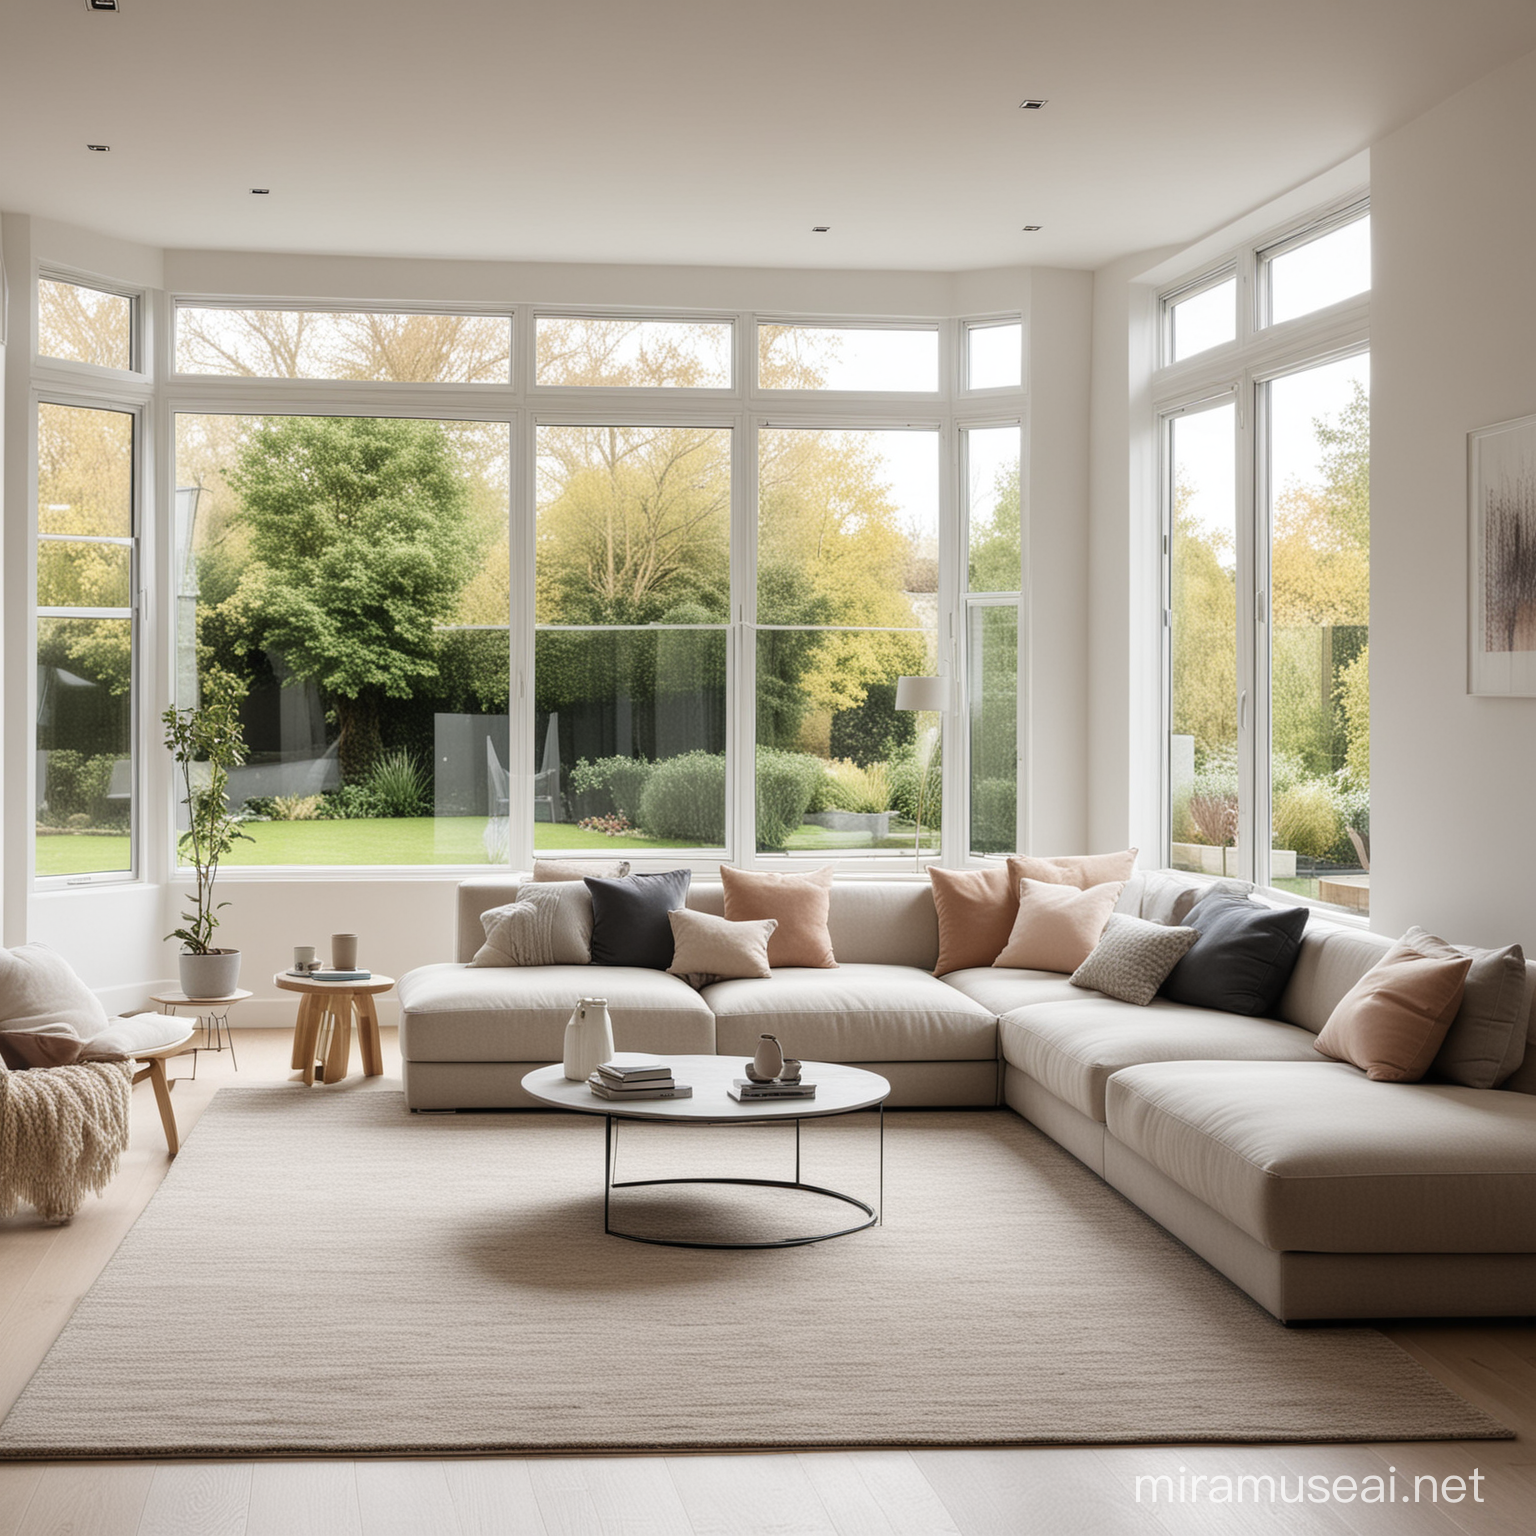 Contemporary Living Room with Bright Seating and Garden View Window